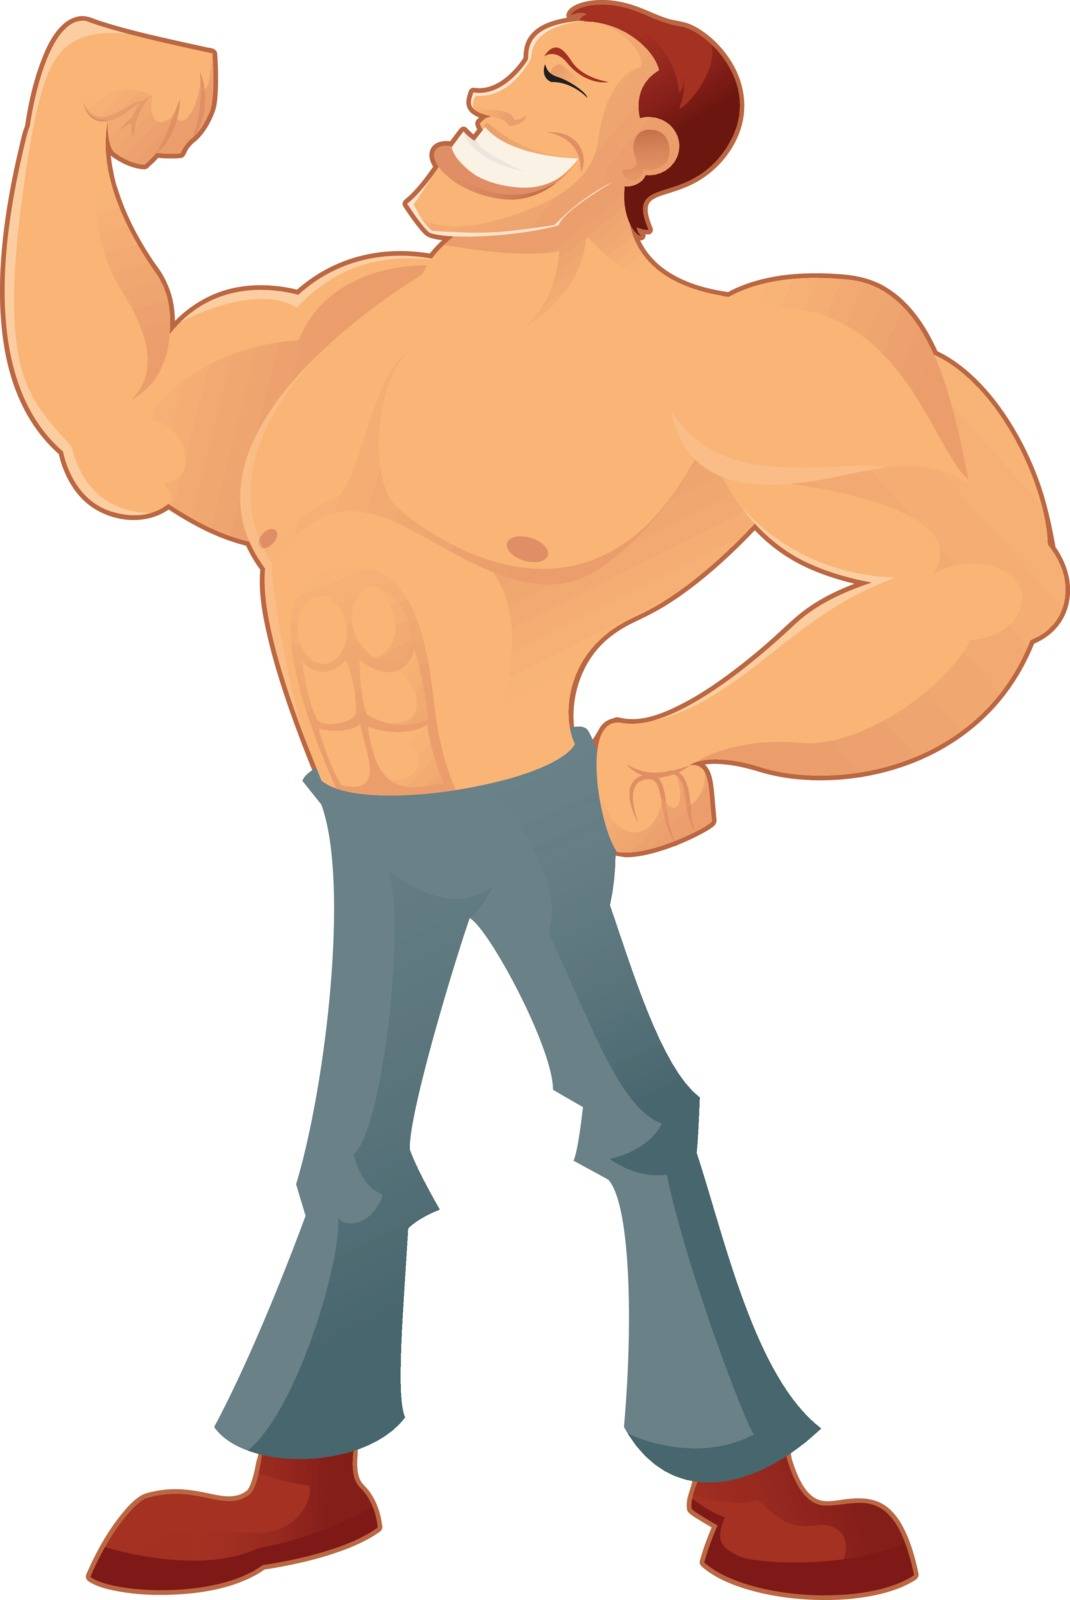 Vector image of a cartoon smiling Muscleman